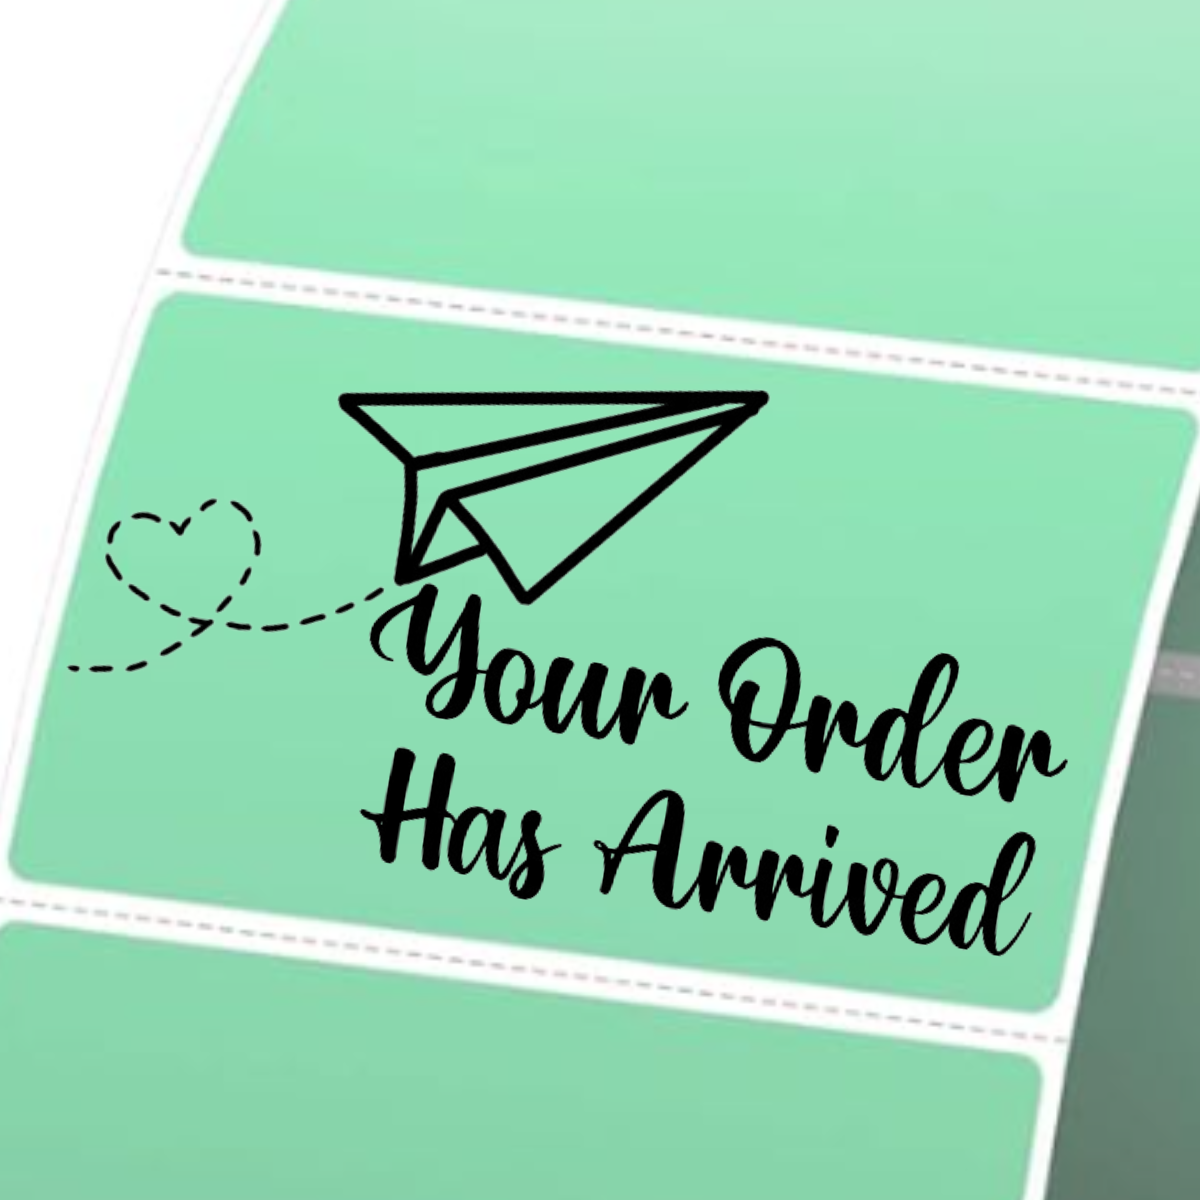 Thank You For Your Order Floral